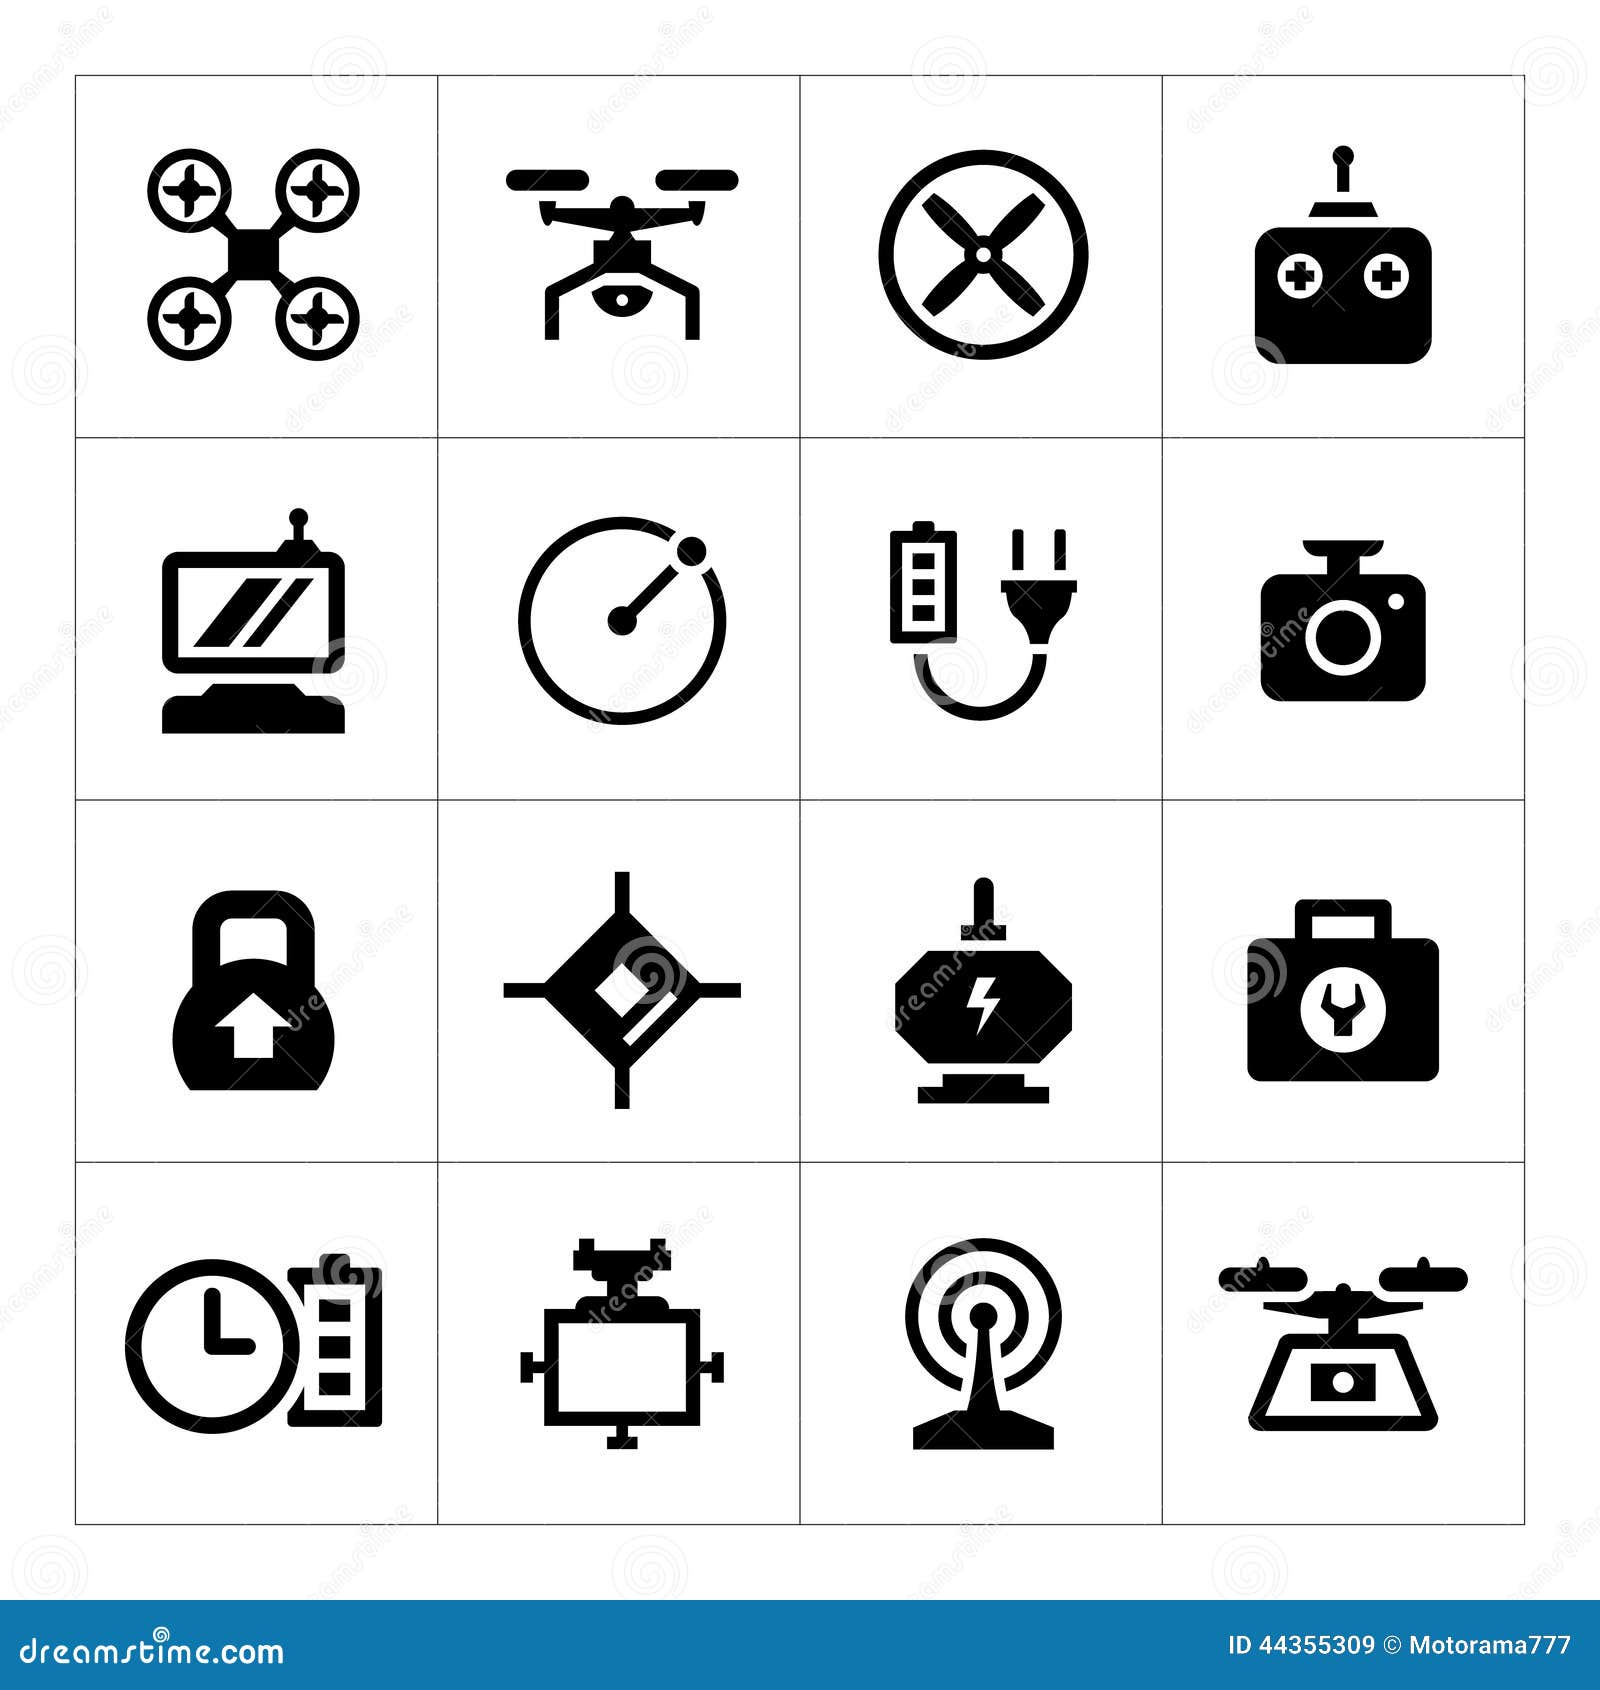 set icons of quadrocopter, hexacopter, multicopter and drone